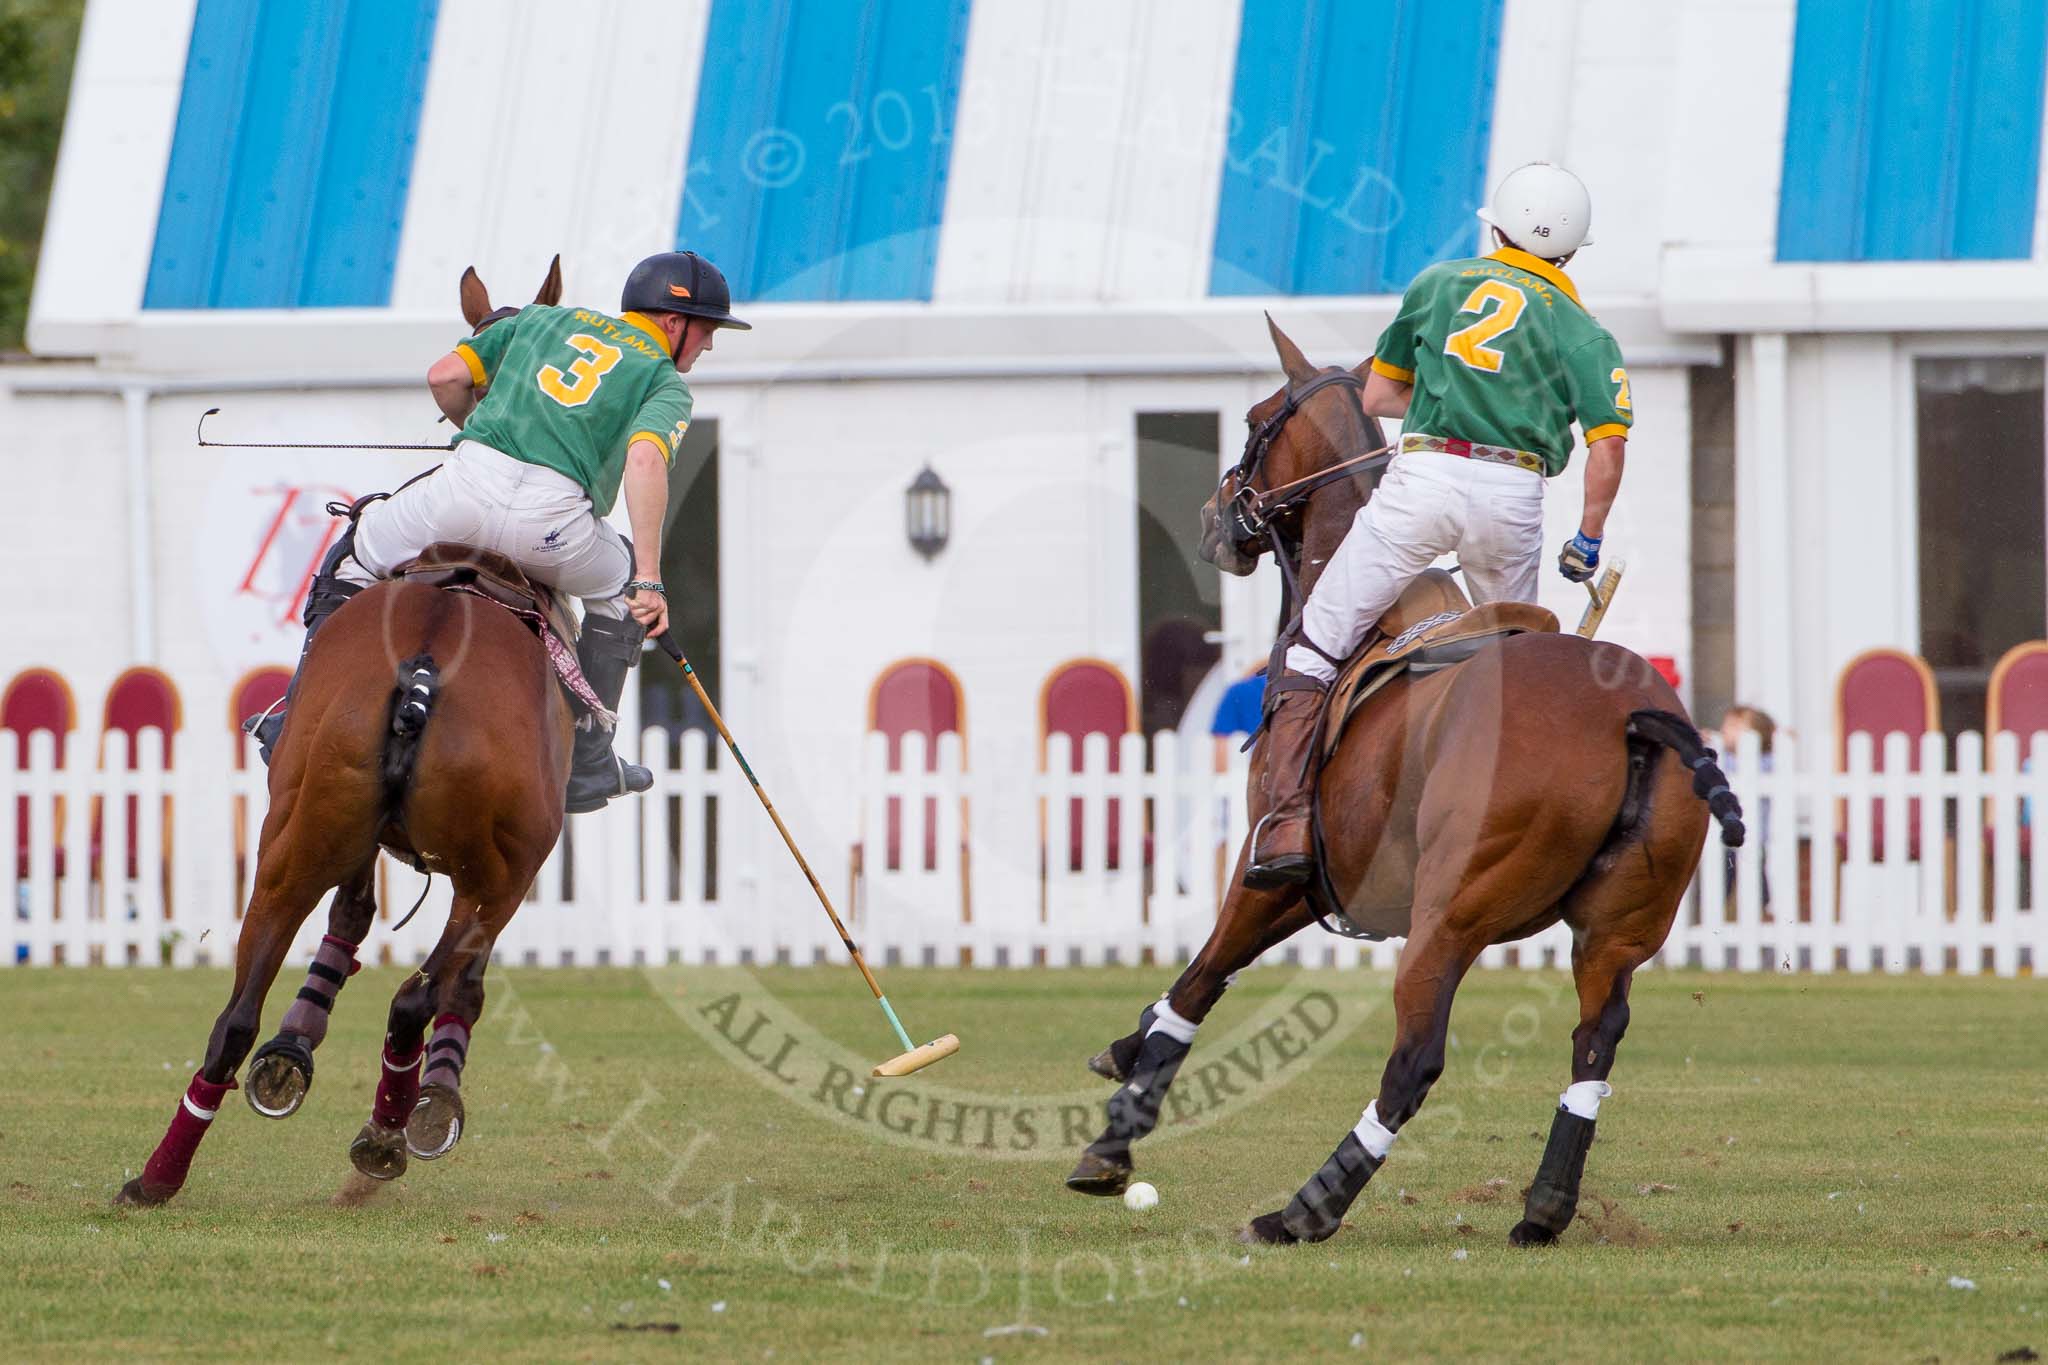 DBPC Polo in the Park 2013, Final of the Tusk Trophy (4 Goals), Rutland vs C.A.N.I..
Dallas Burston Polo Club, ,
Southam,
Warwickshire,
United Kingdom,
on 01 September 2013 at 17:09, image #640